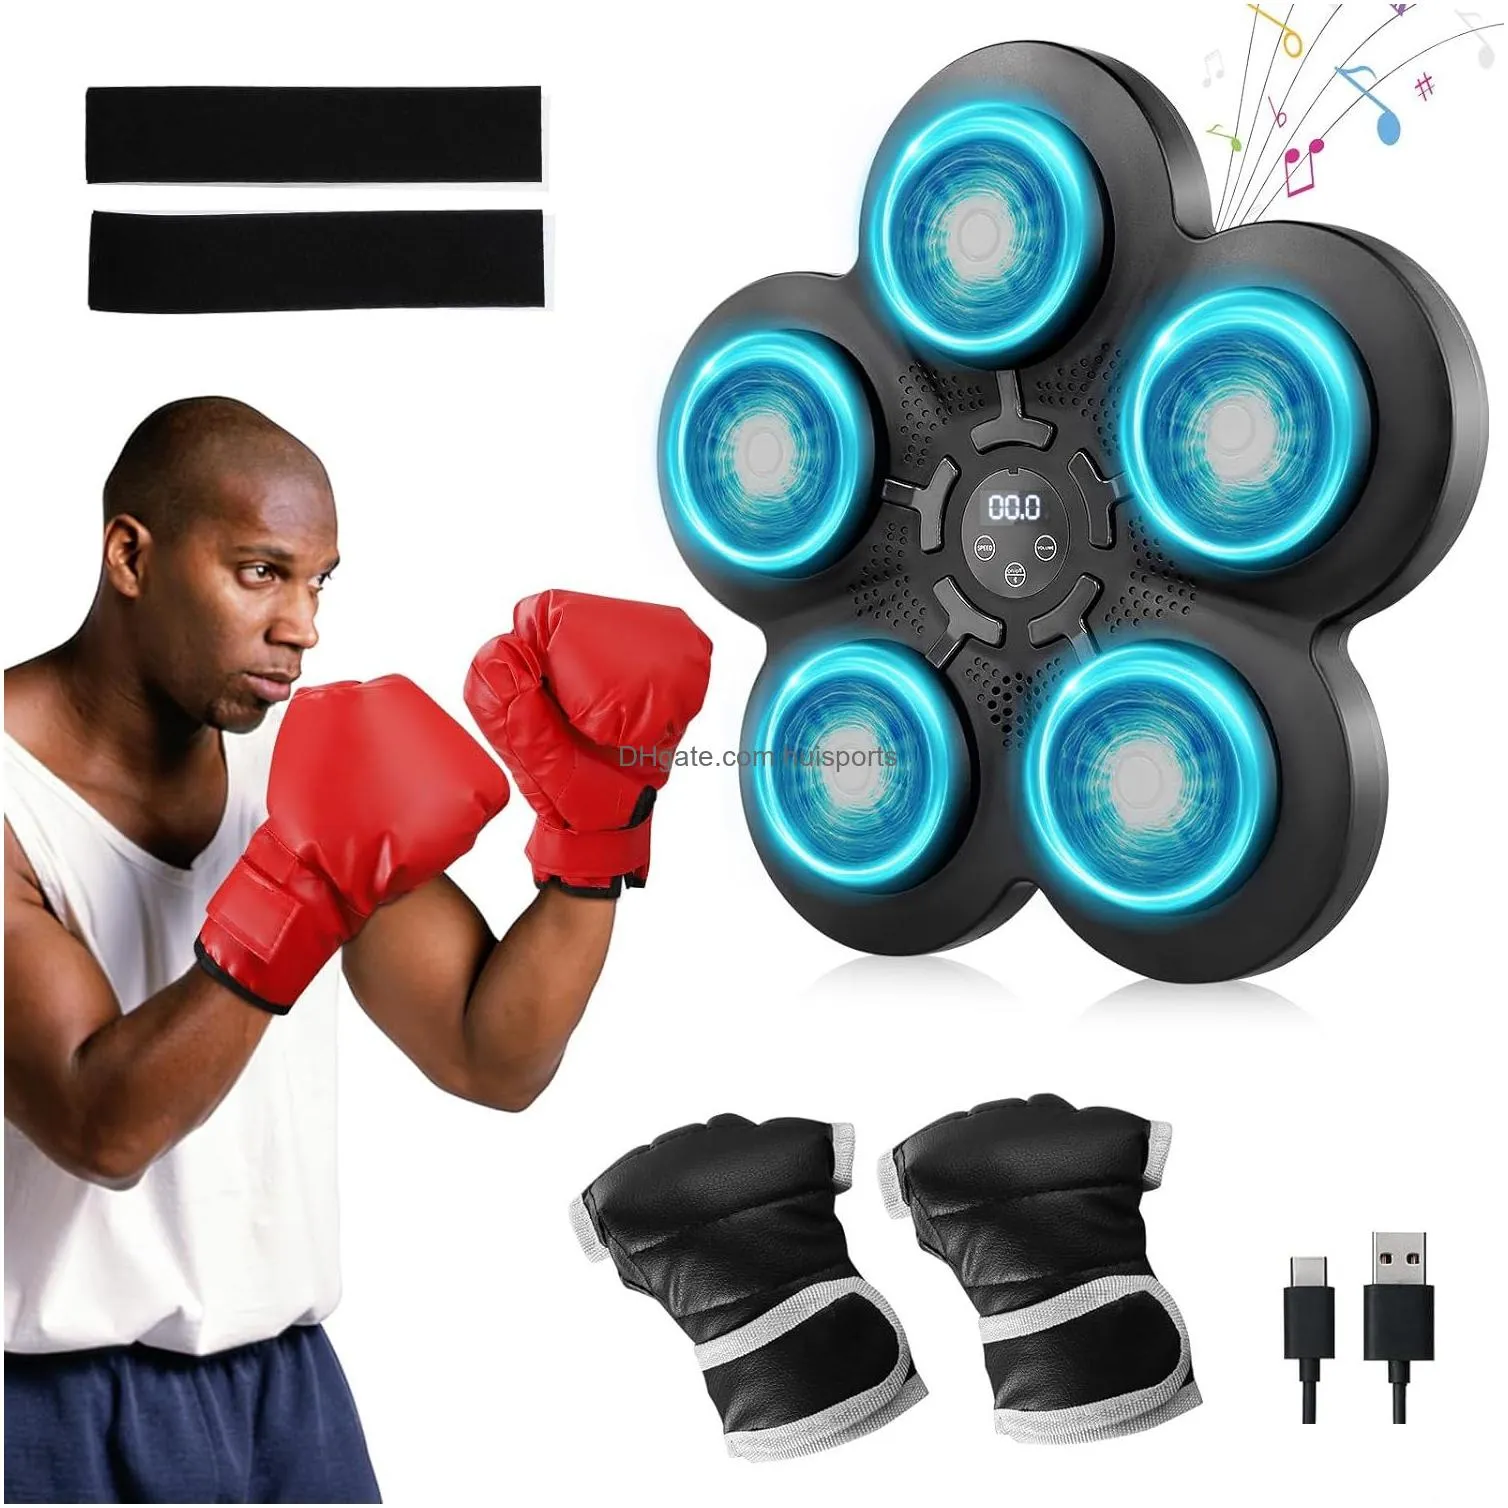 music boxing machine smart music boxing machine wall mounted with 9-level speed adjustment one punch boxing machine with led light boxing game with bluetooth